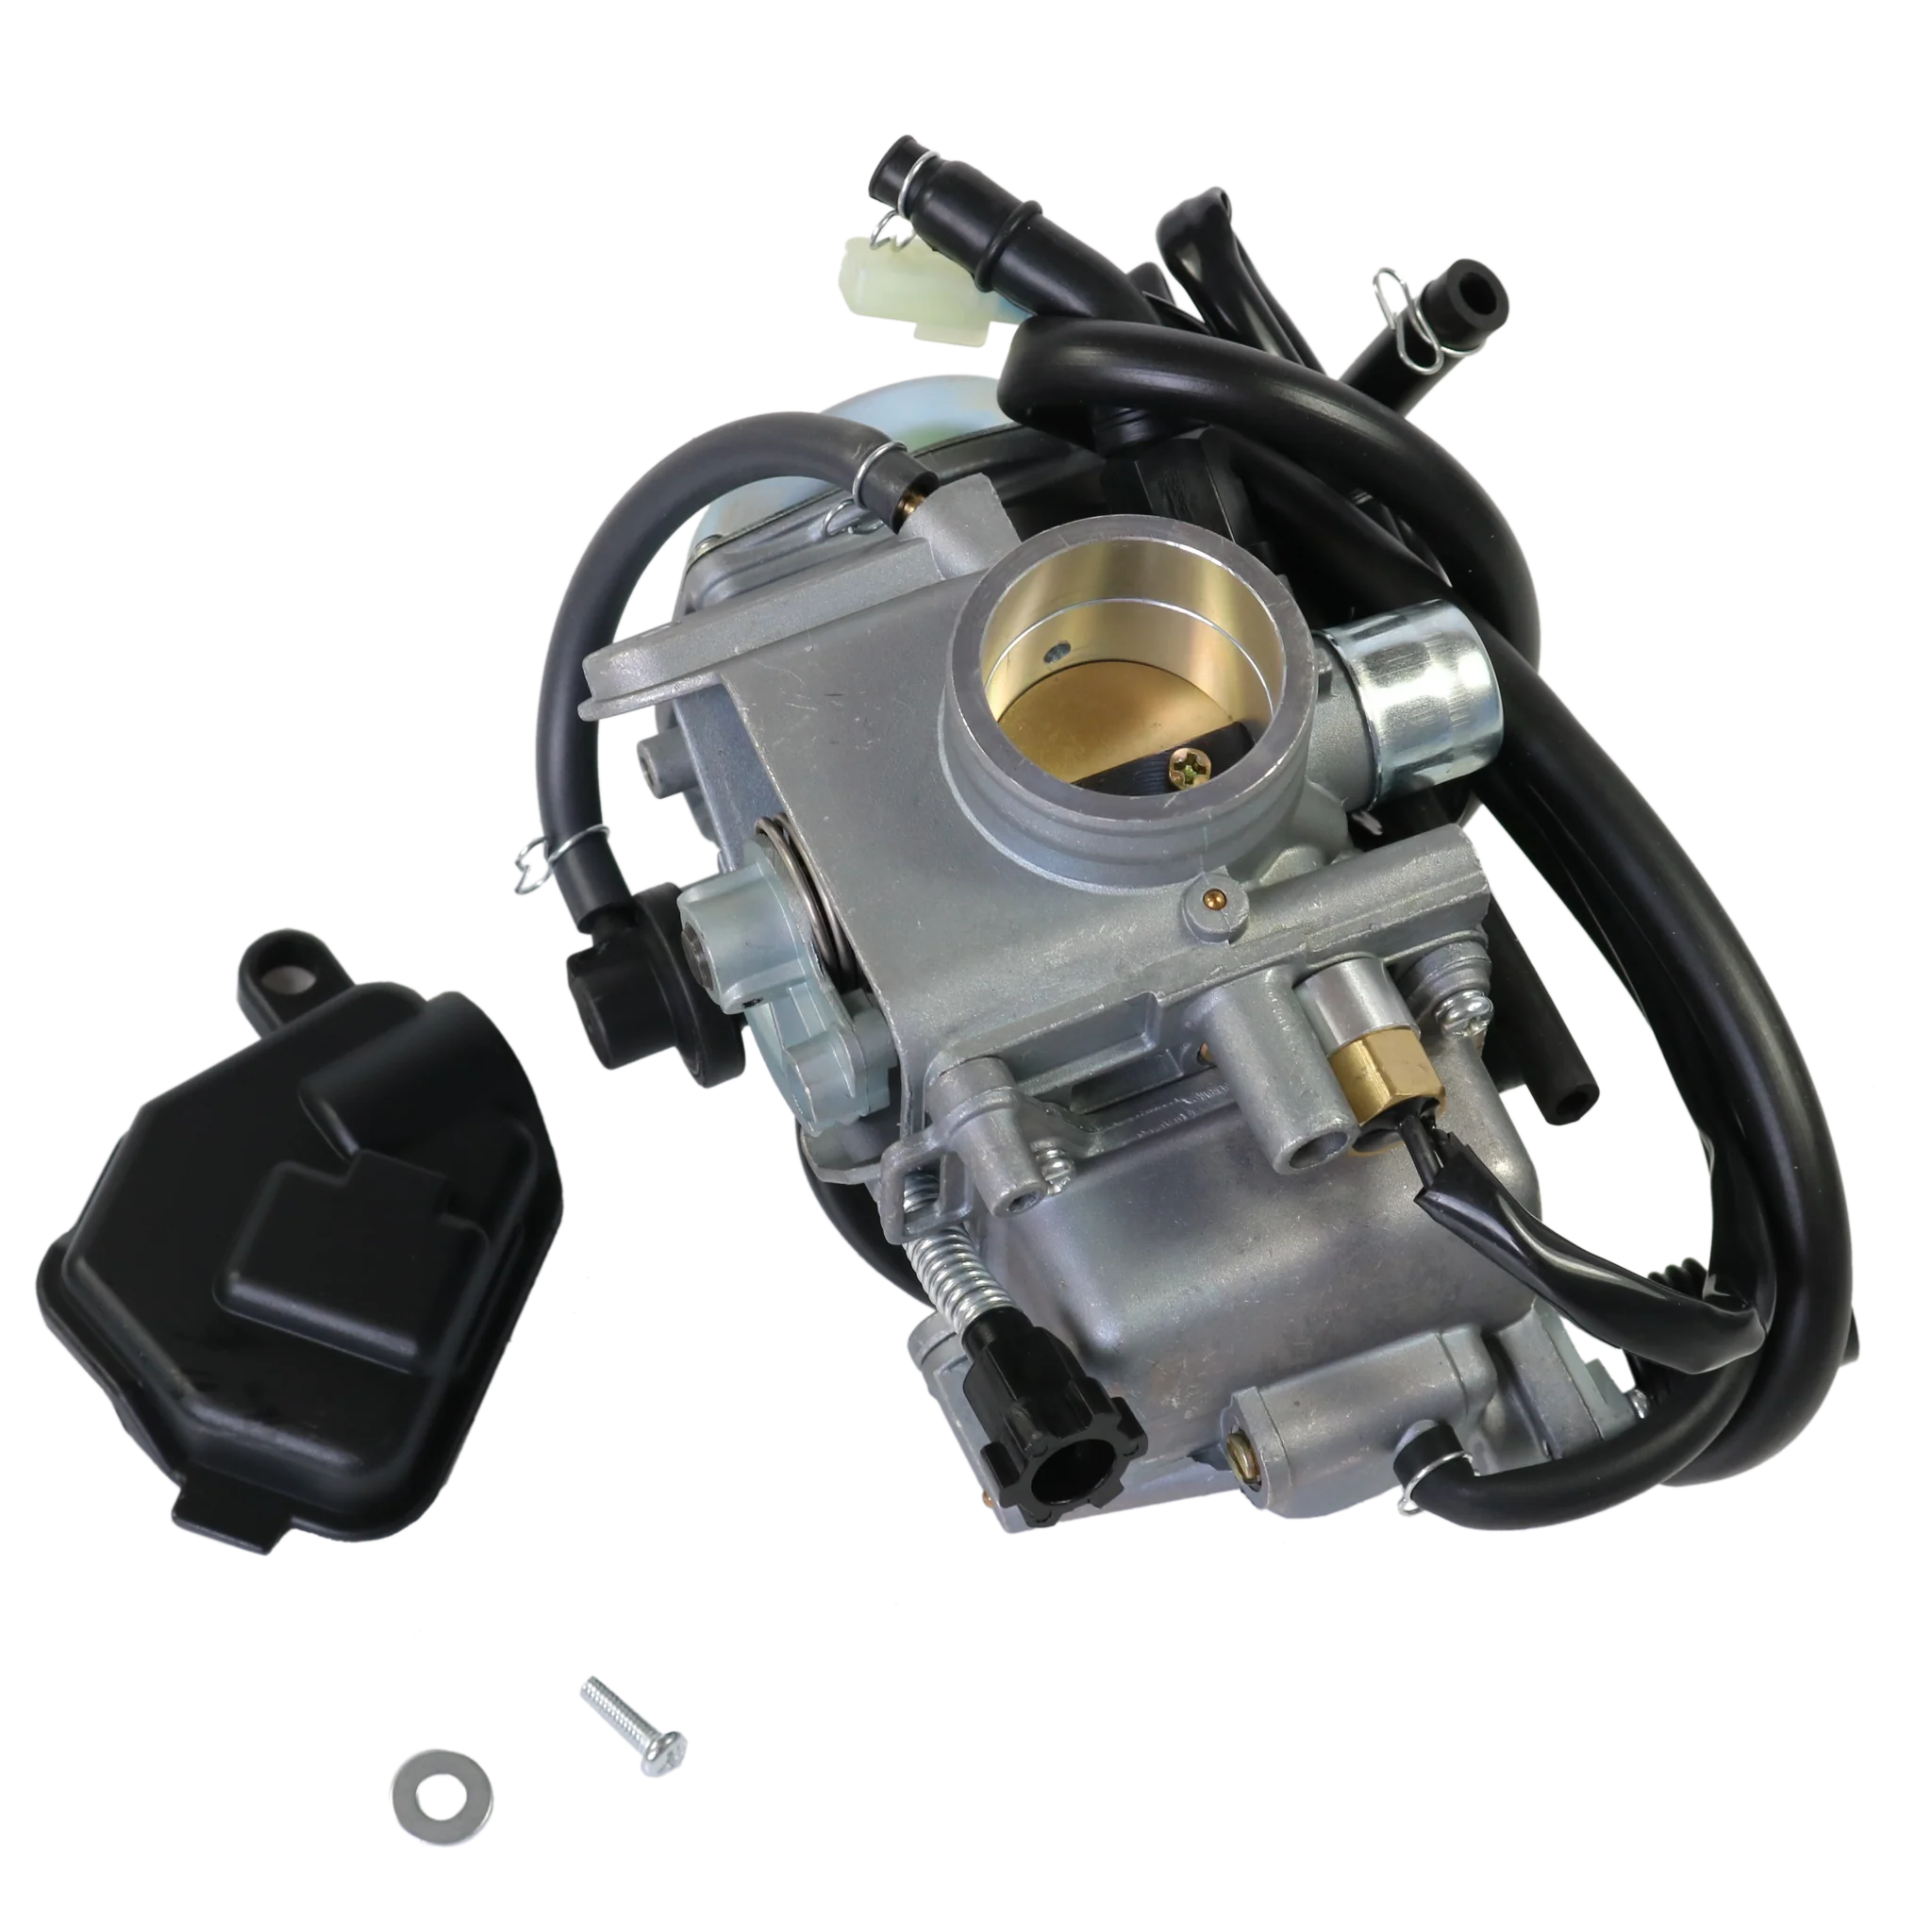 Used 2000-2006 HONDA TRX350 FourTrax Rancher350 OEM Carburetor Carb 16100- HN5-M41 2022 2023 is in stock and for sale - Price & Expert Review 2022-2023